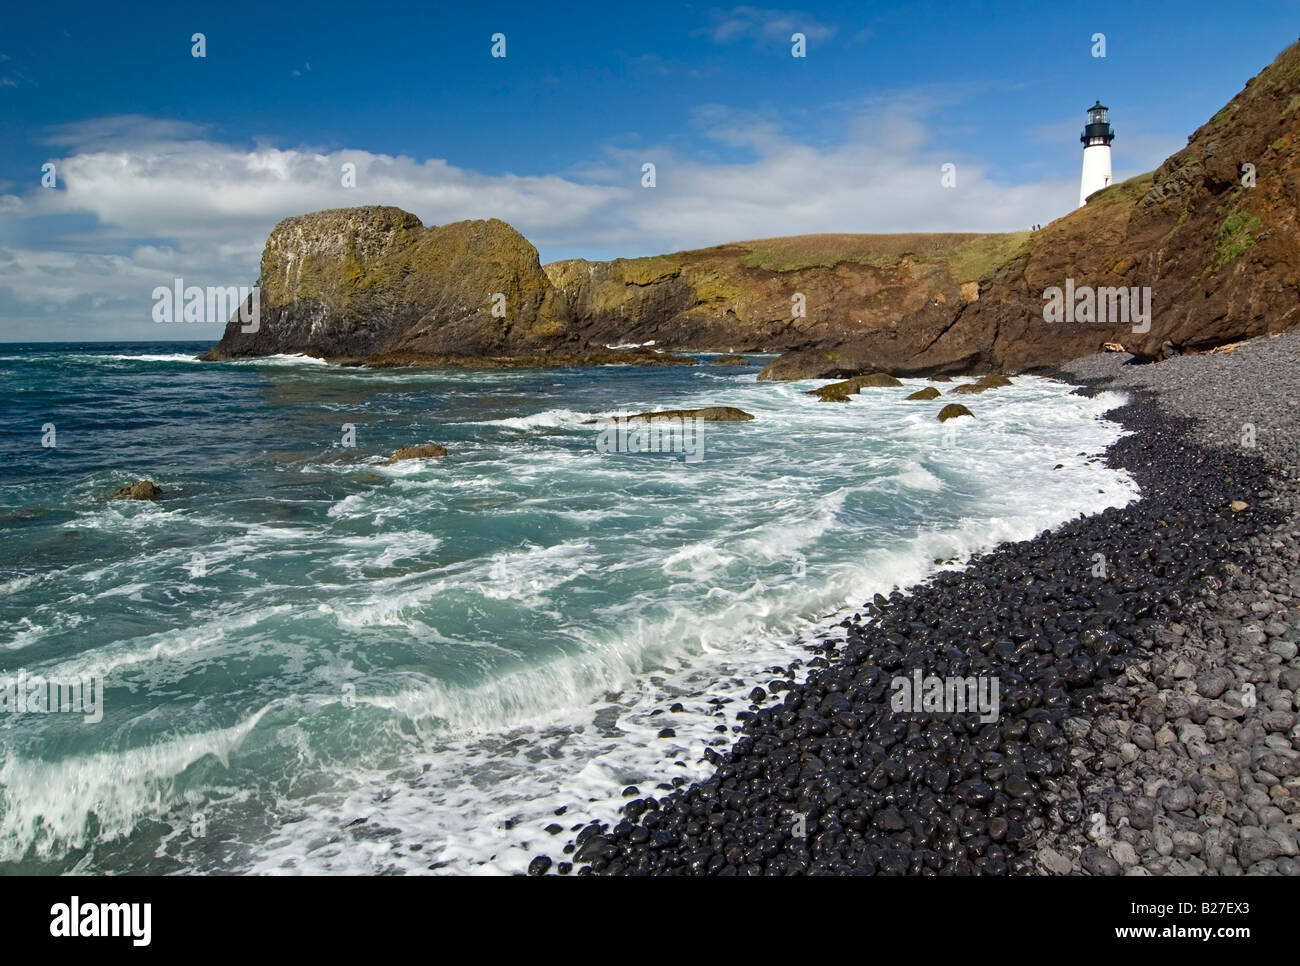 Yaquina Lighthouse on top of rocky beach Stock Photo